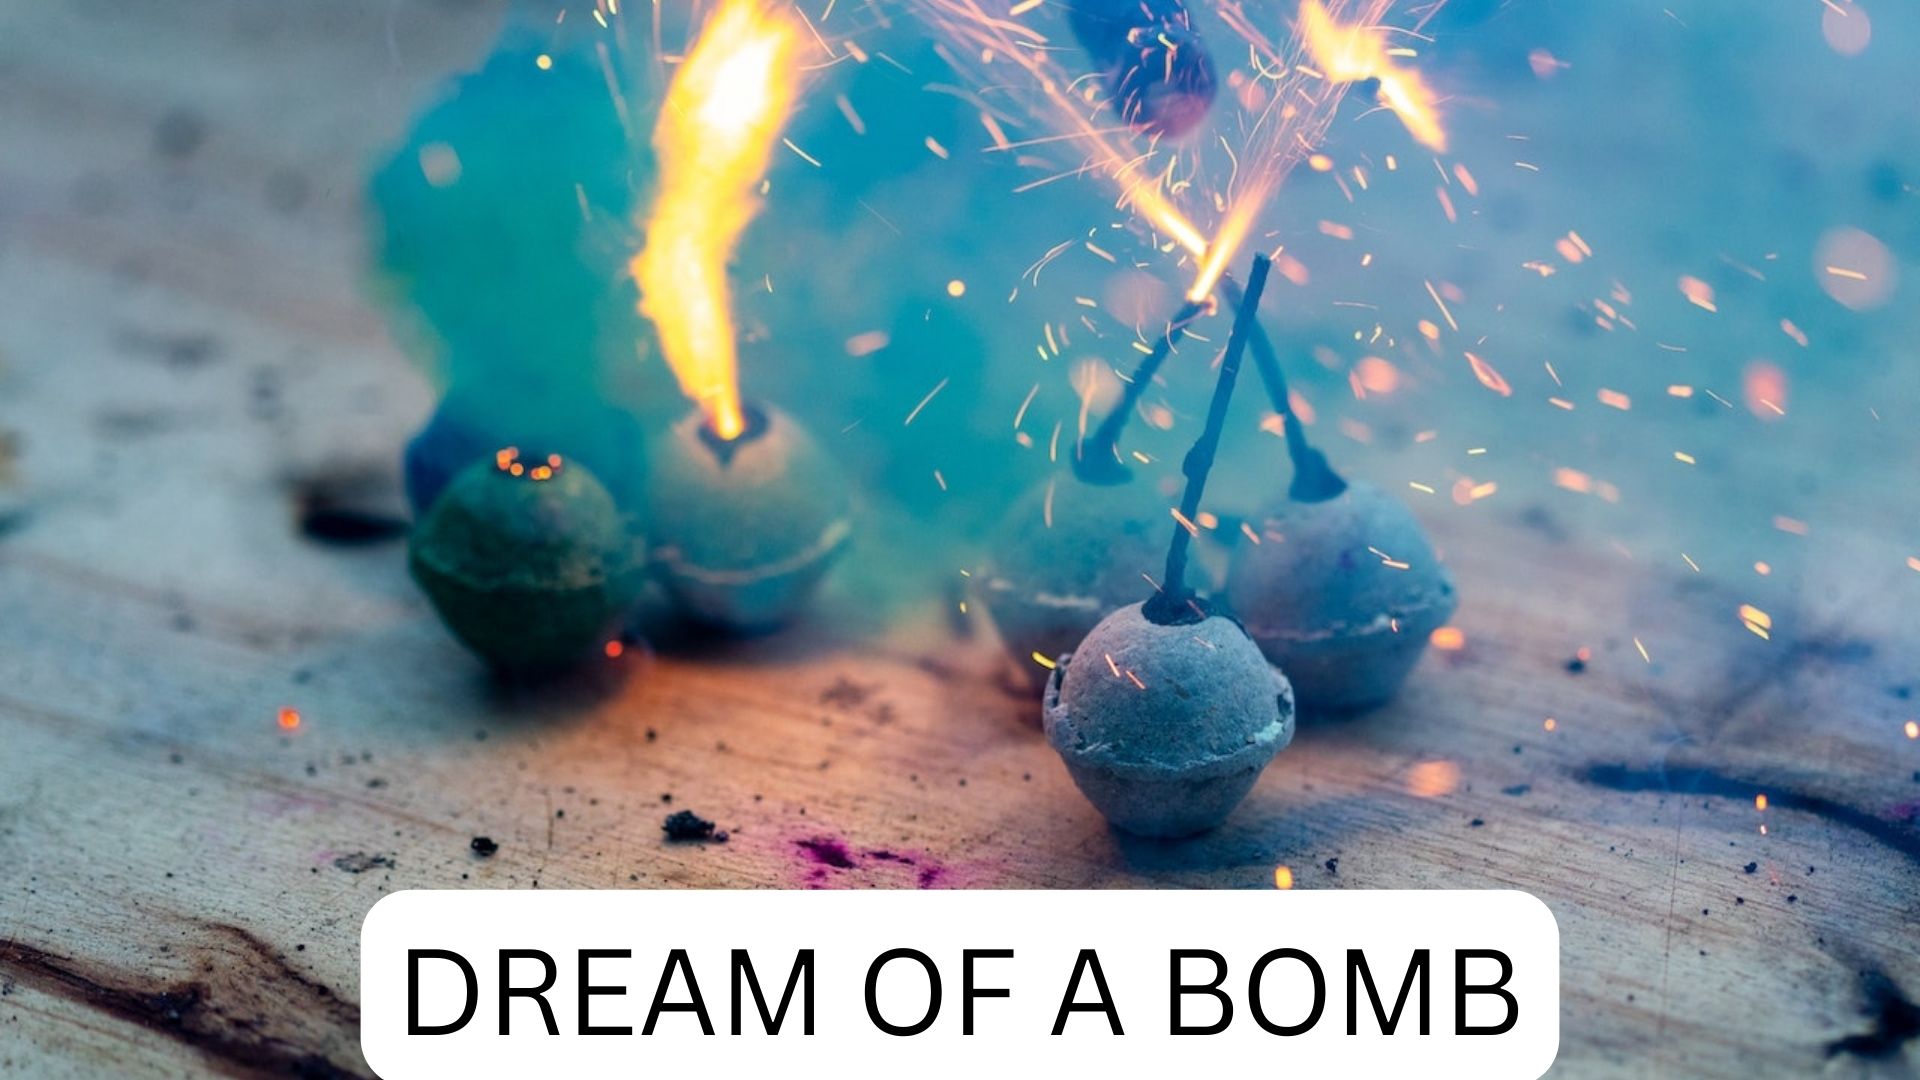 What Does A Nuclear Bomb Symbolize In Dreams?